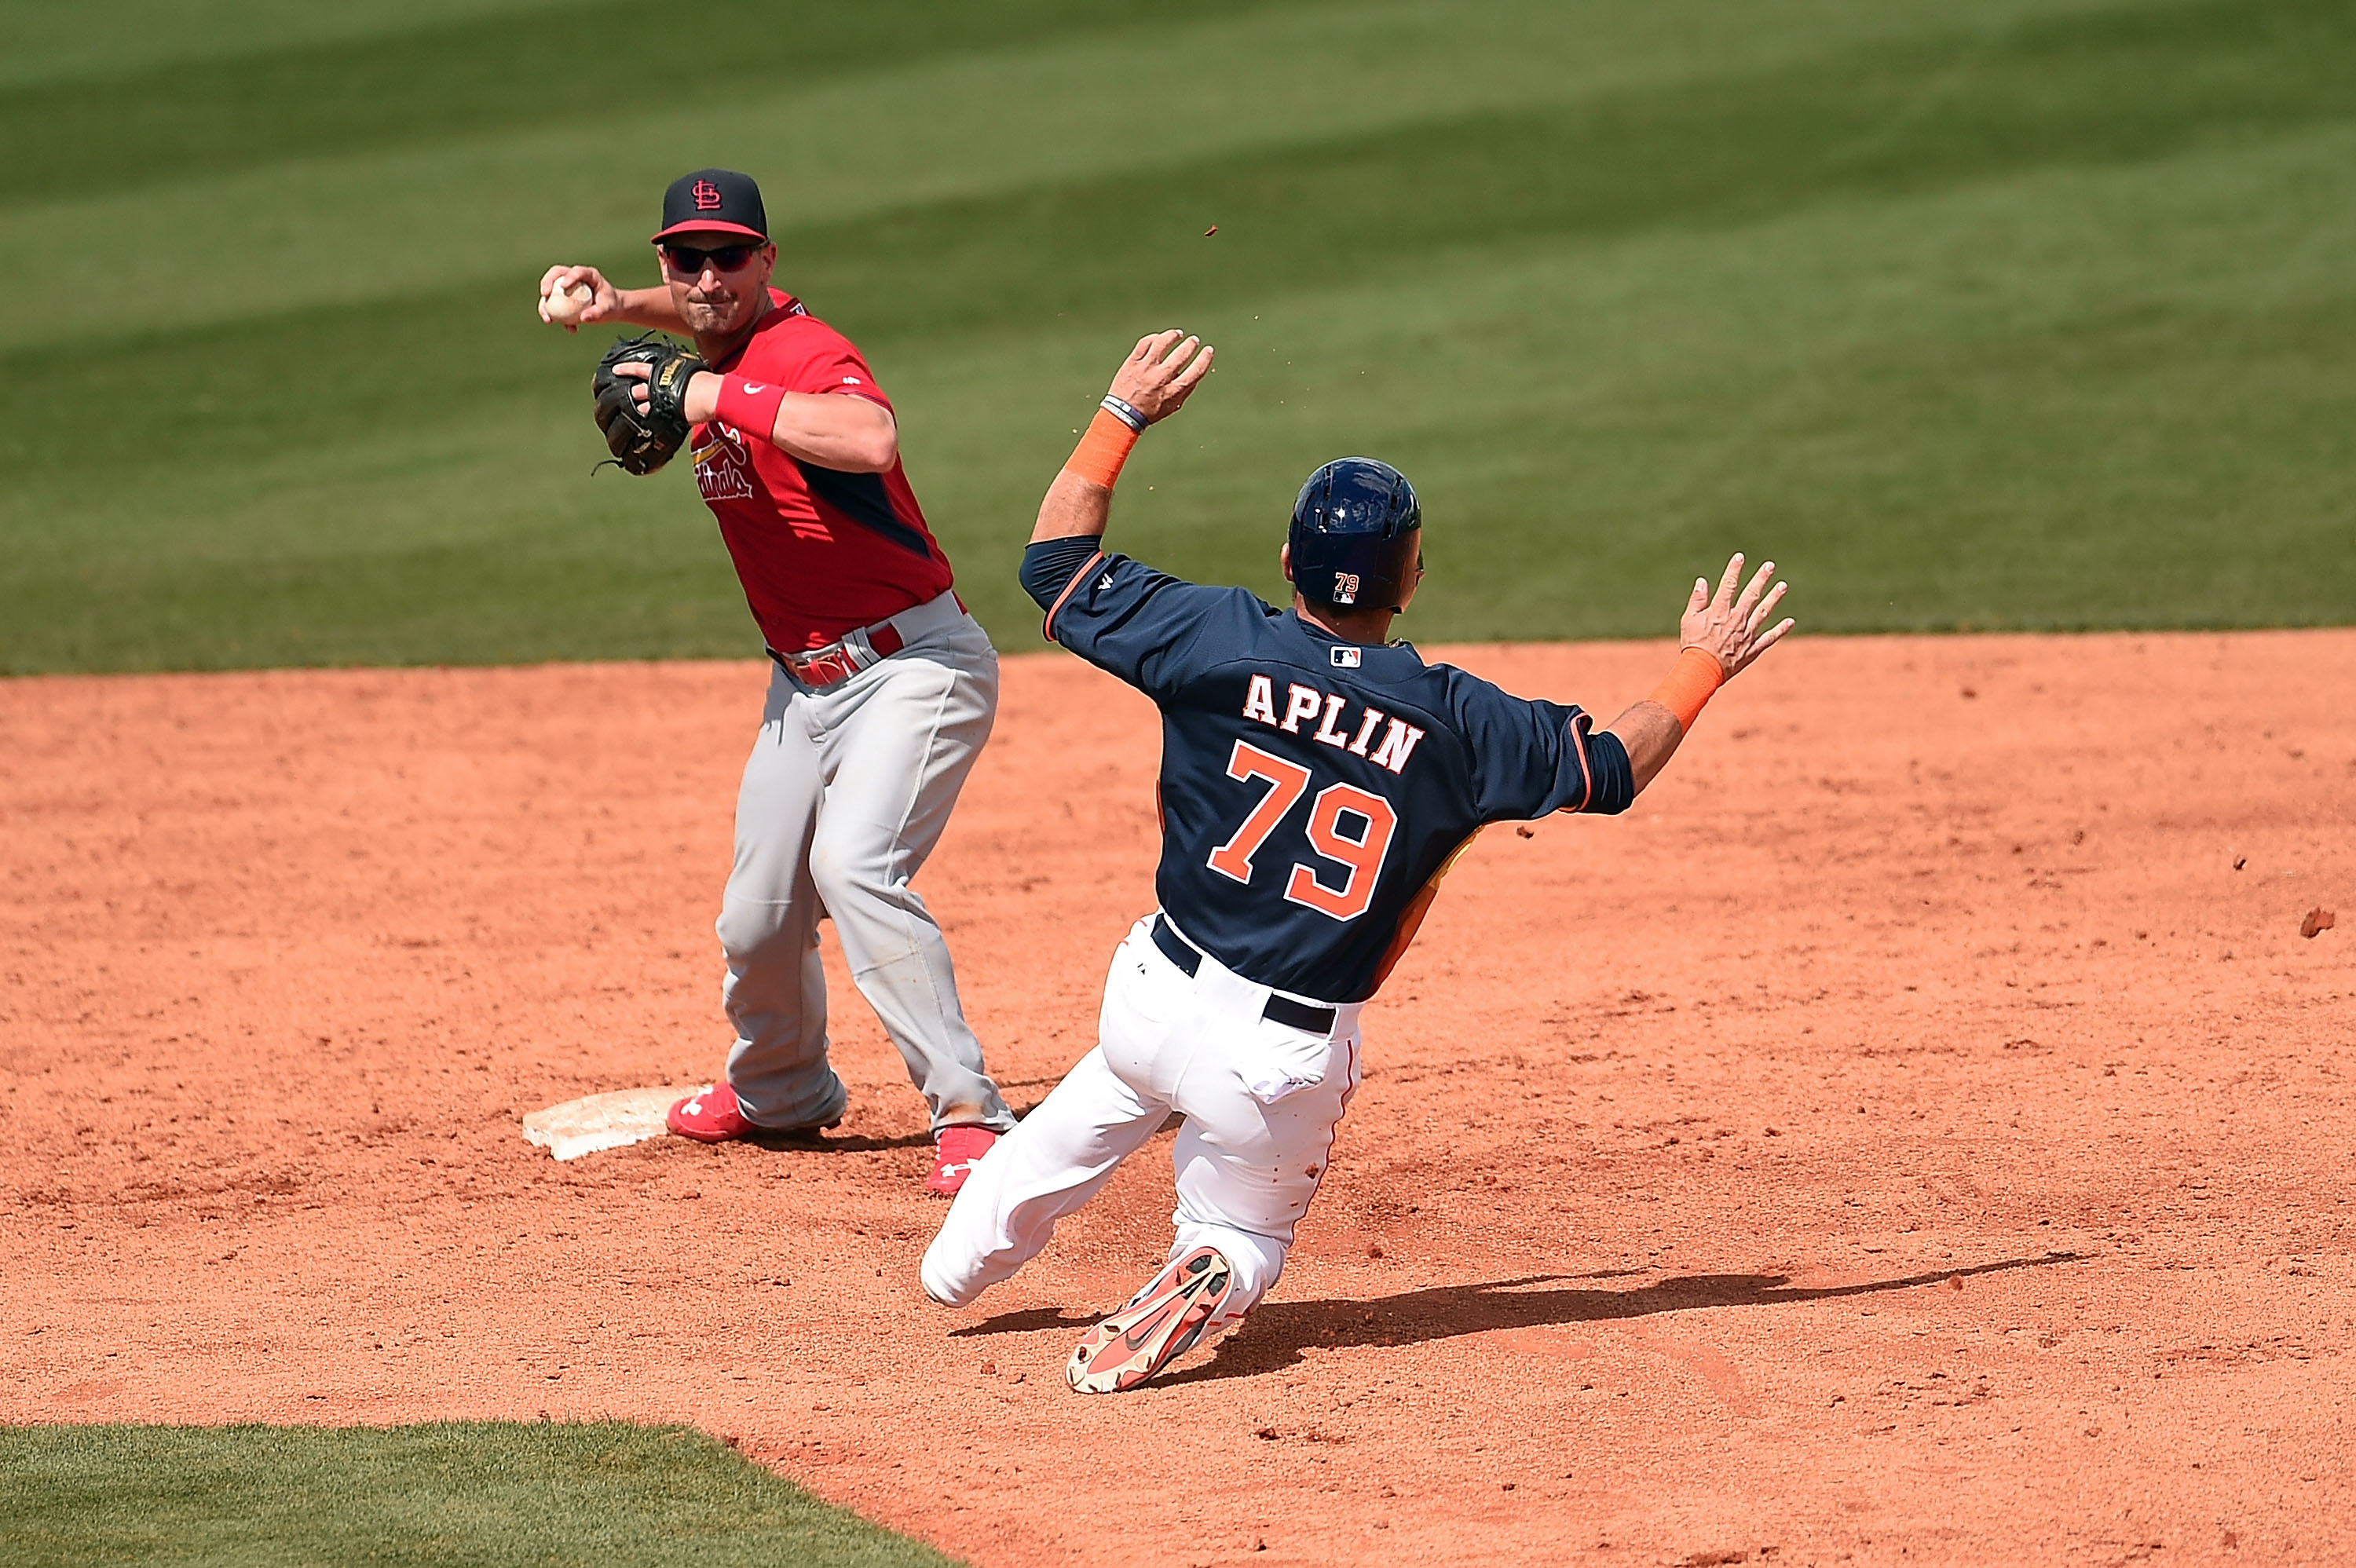 Andrew Aplin, of the Houston Atros, slides into second base as Dean Anna, of the St. Louis Cardinals, turns a double play during a 2015 Spring Training game. (Getty)